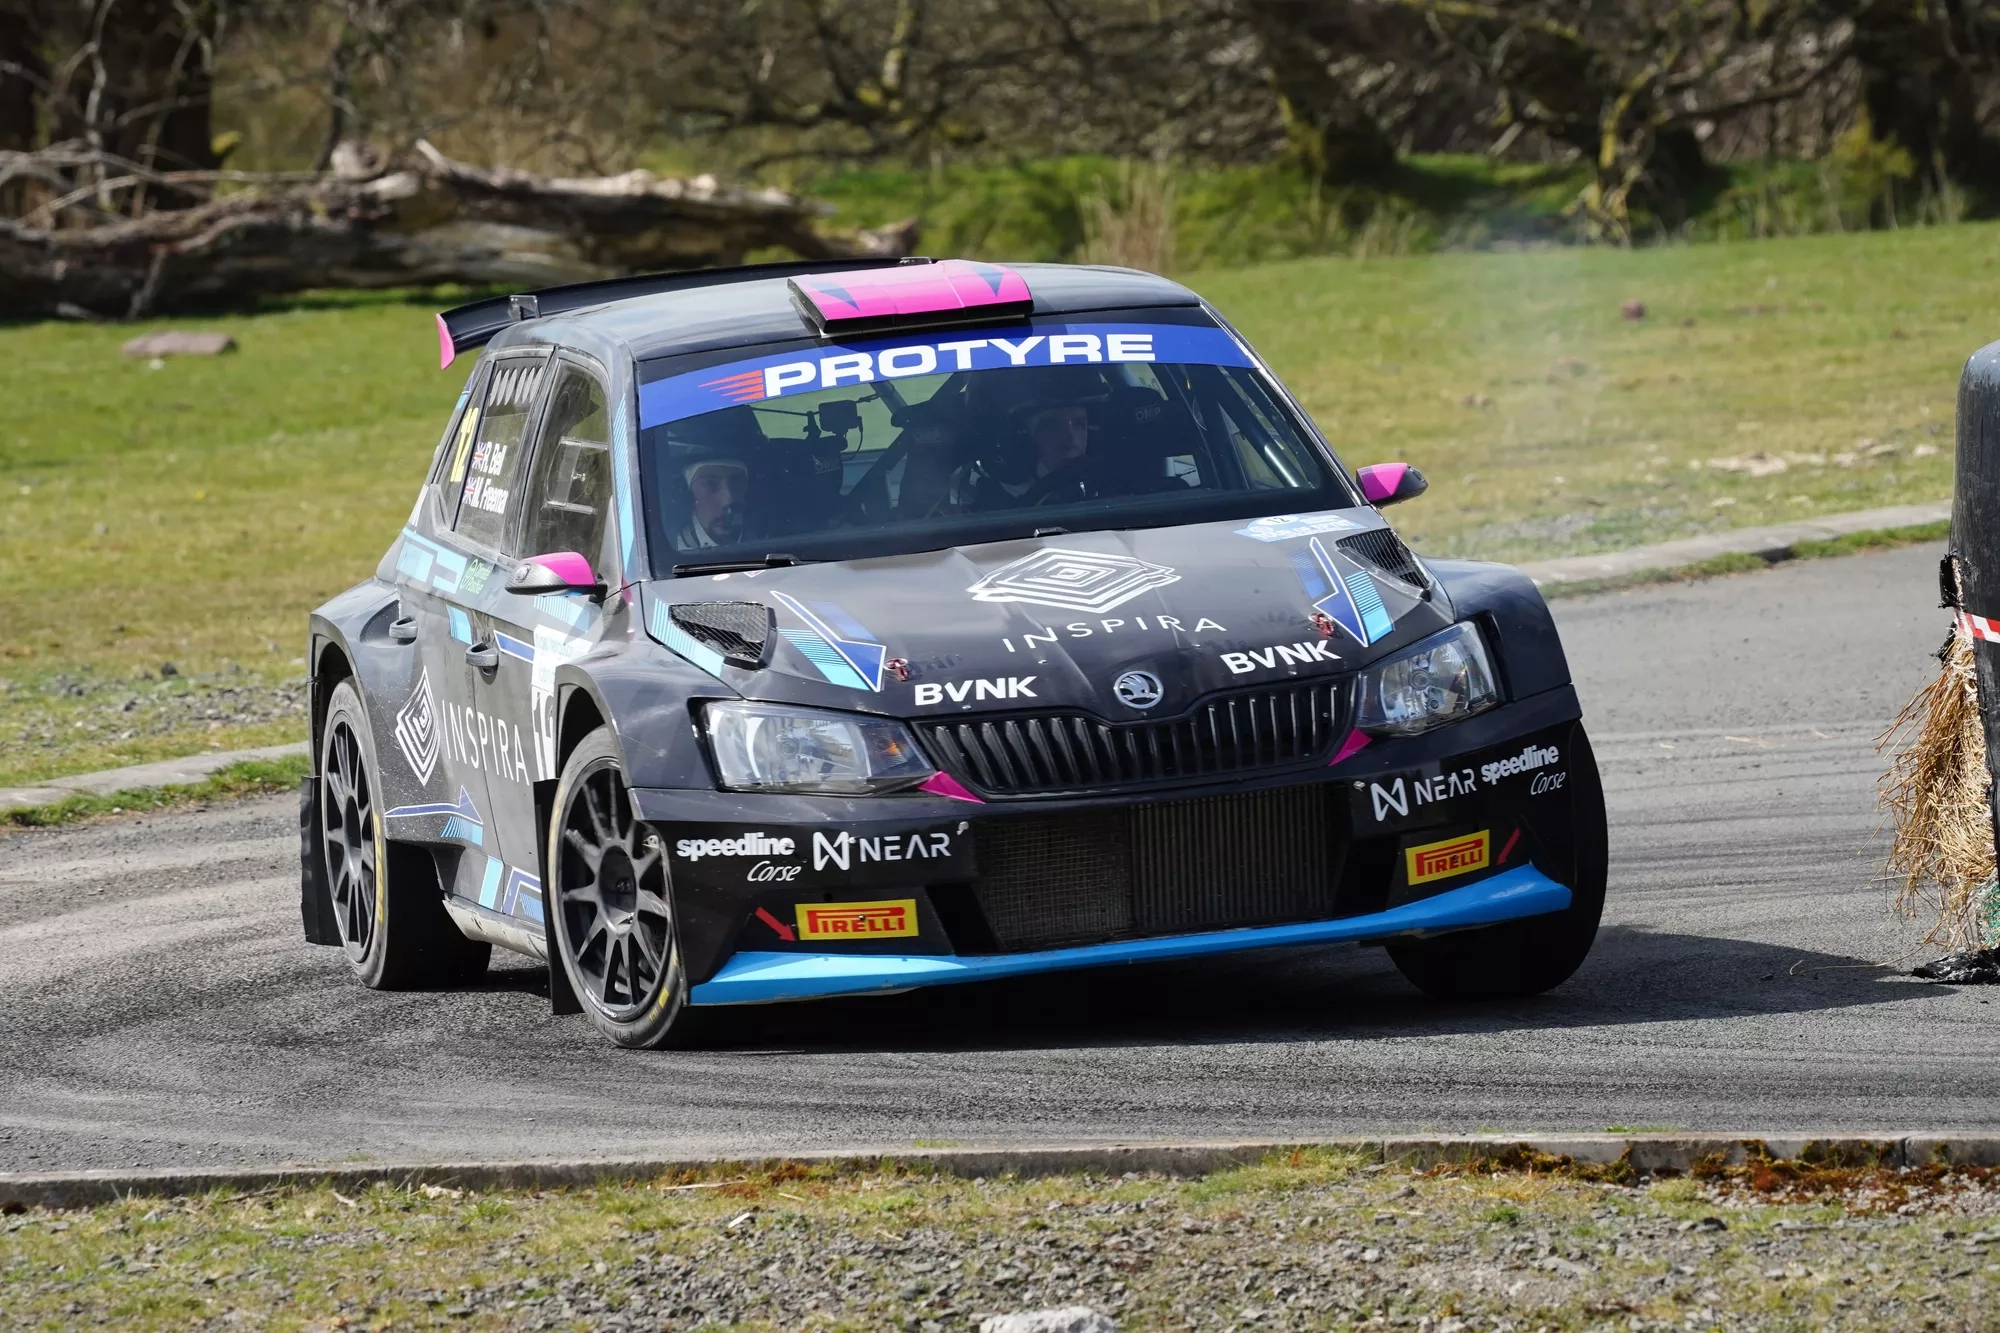 All aboard as the Protyre Asphalt Rally Championship tour heads to the Jim Clark